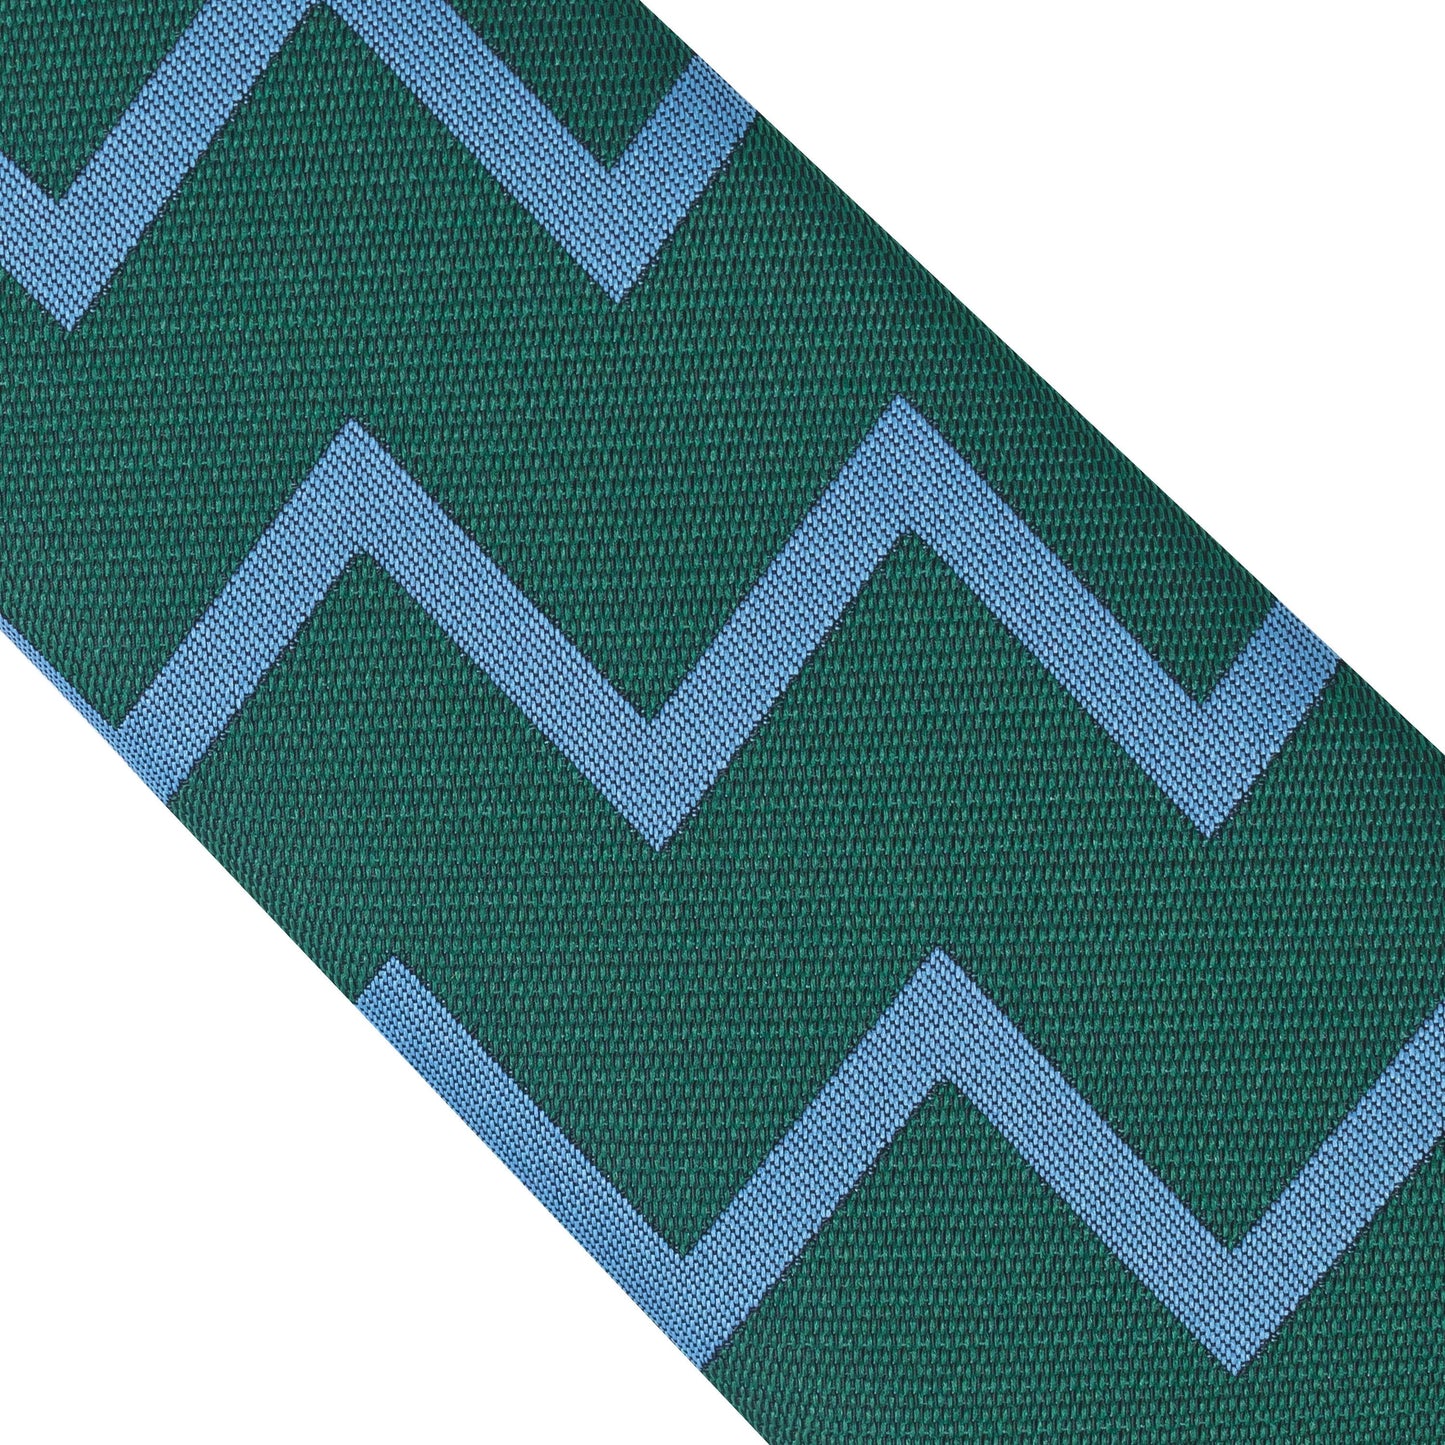 Blue And Green Zig Zag Tie